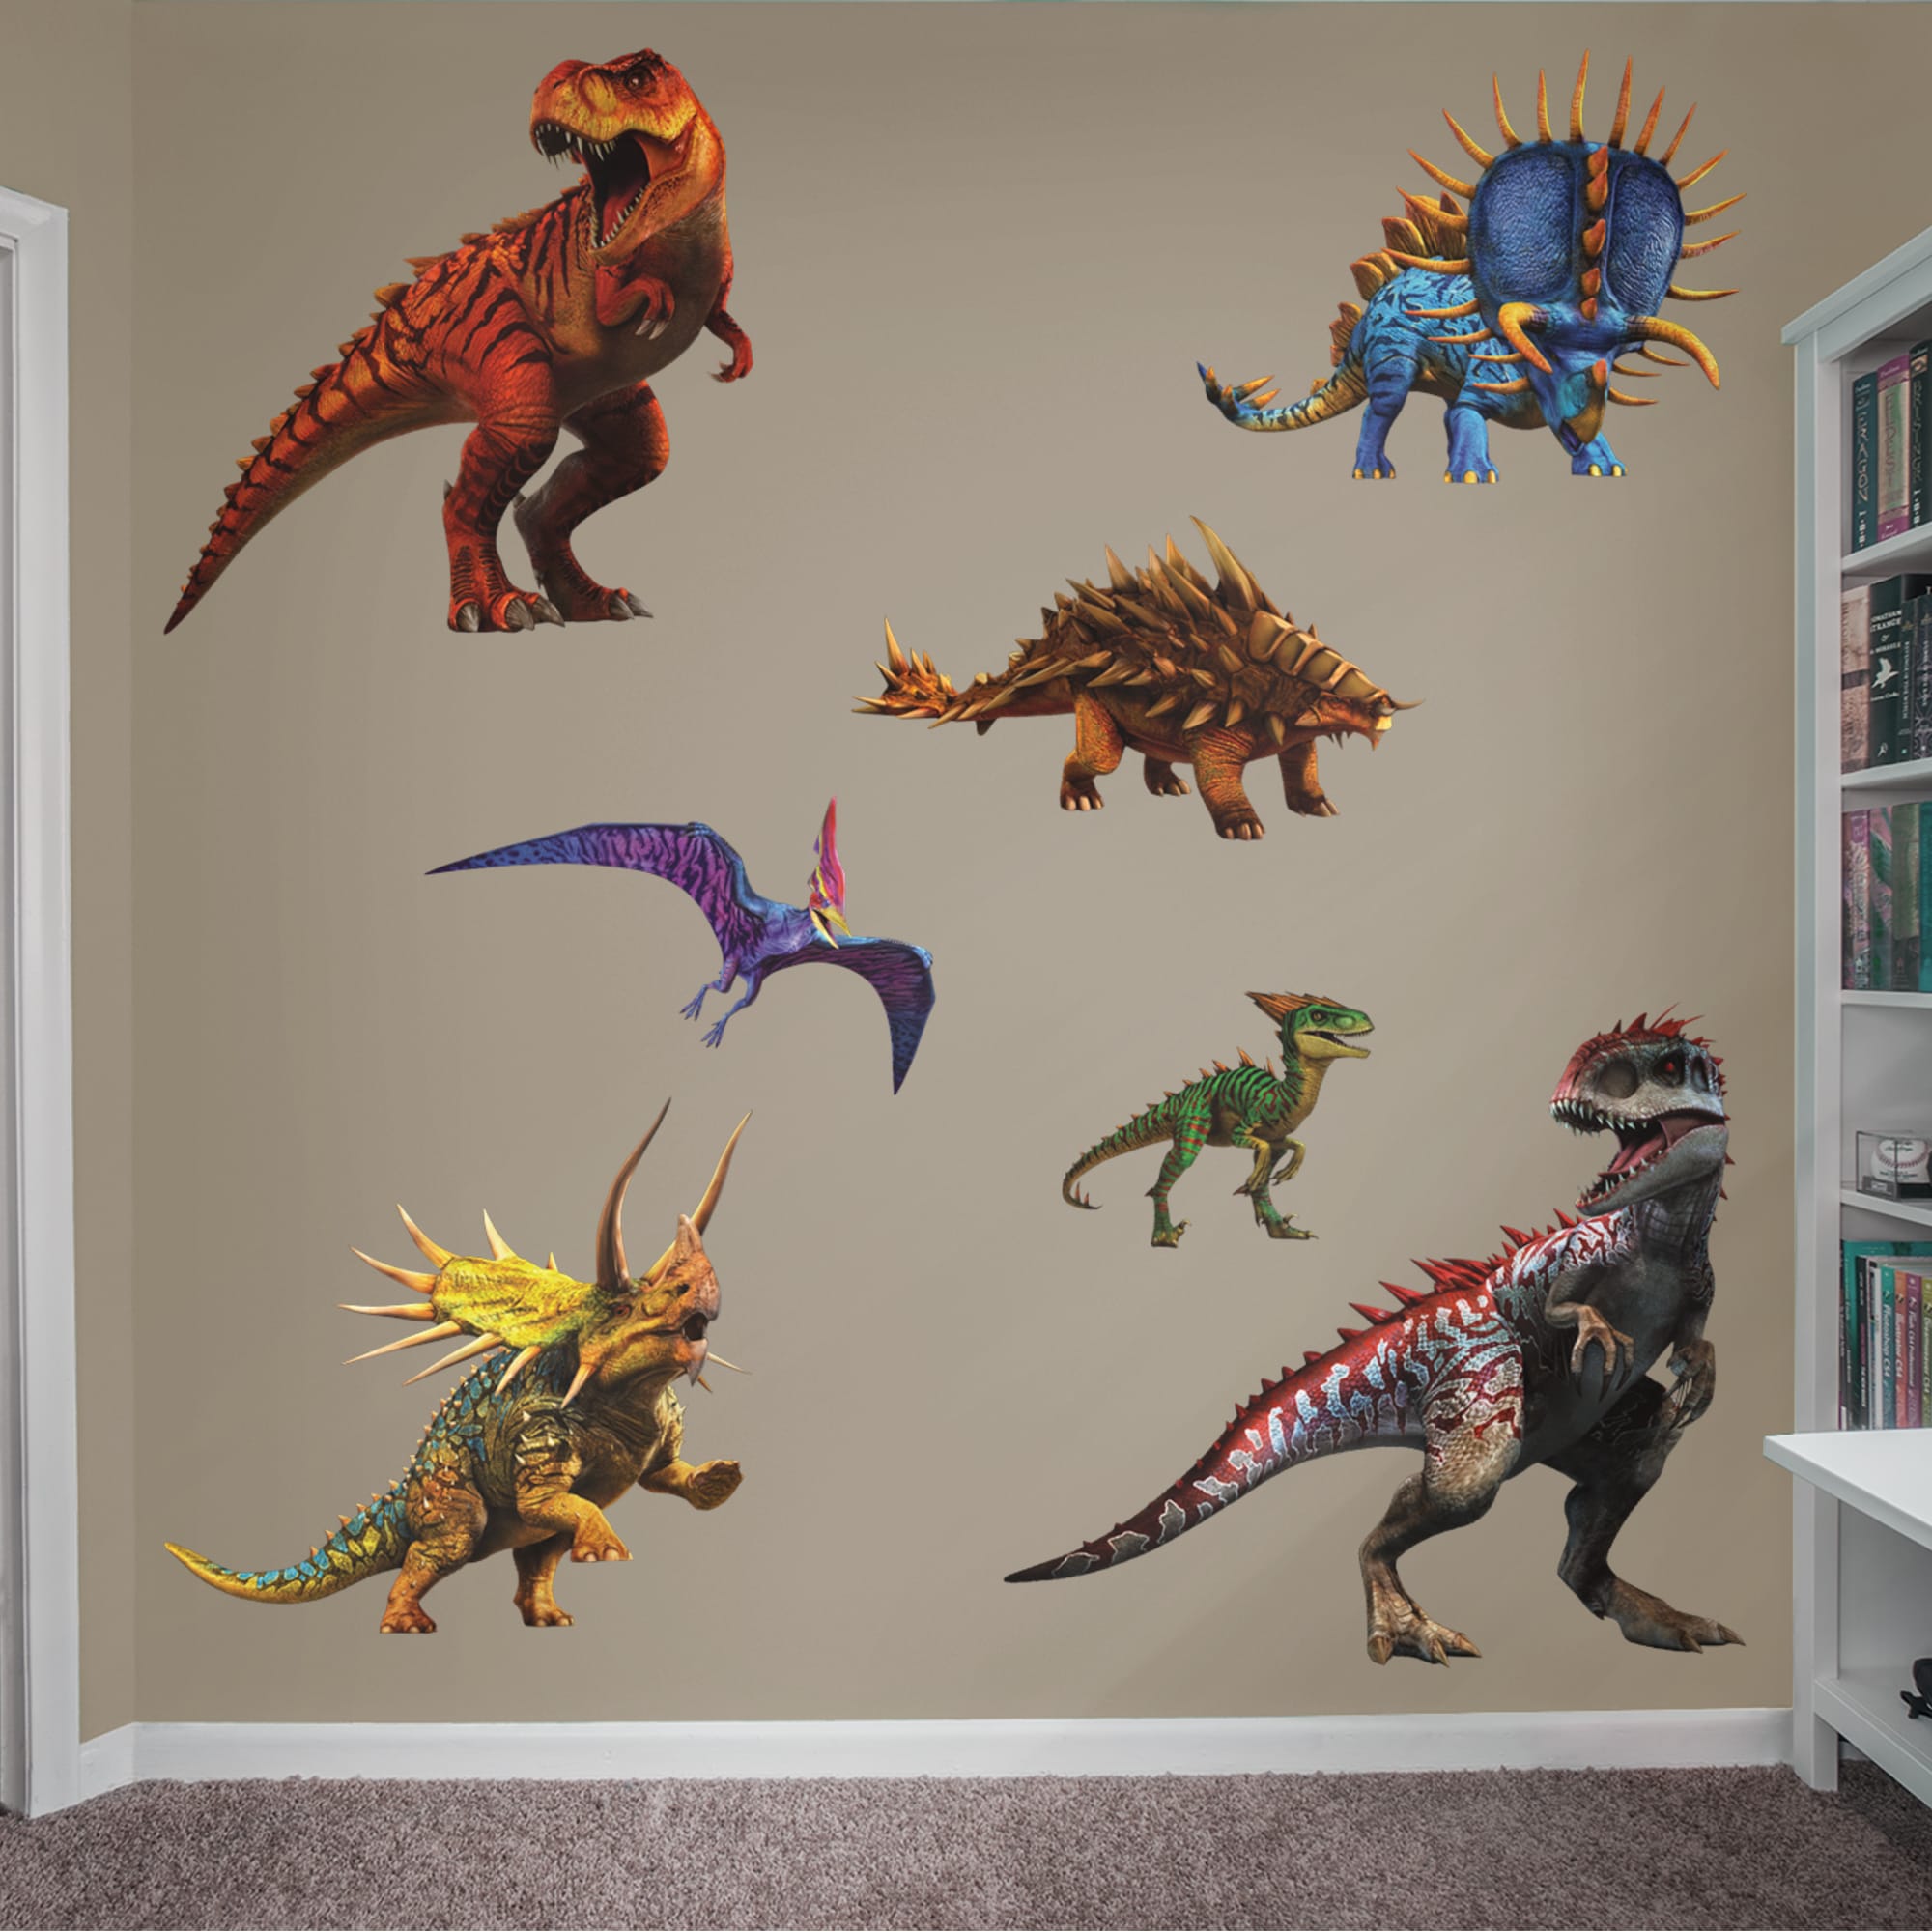 Jurassic World: Hybrid Dinosaurs Collection - Officially Licensed Removable Wall Decal 54.0"W x 80.0"H by Fathead | Vinyl